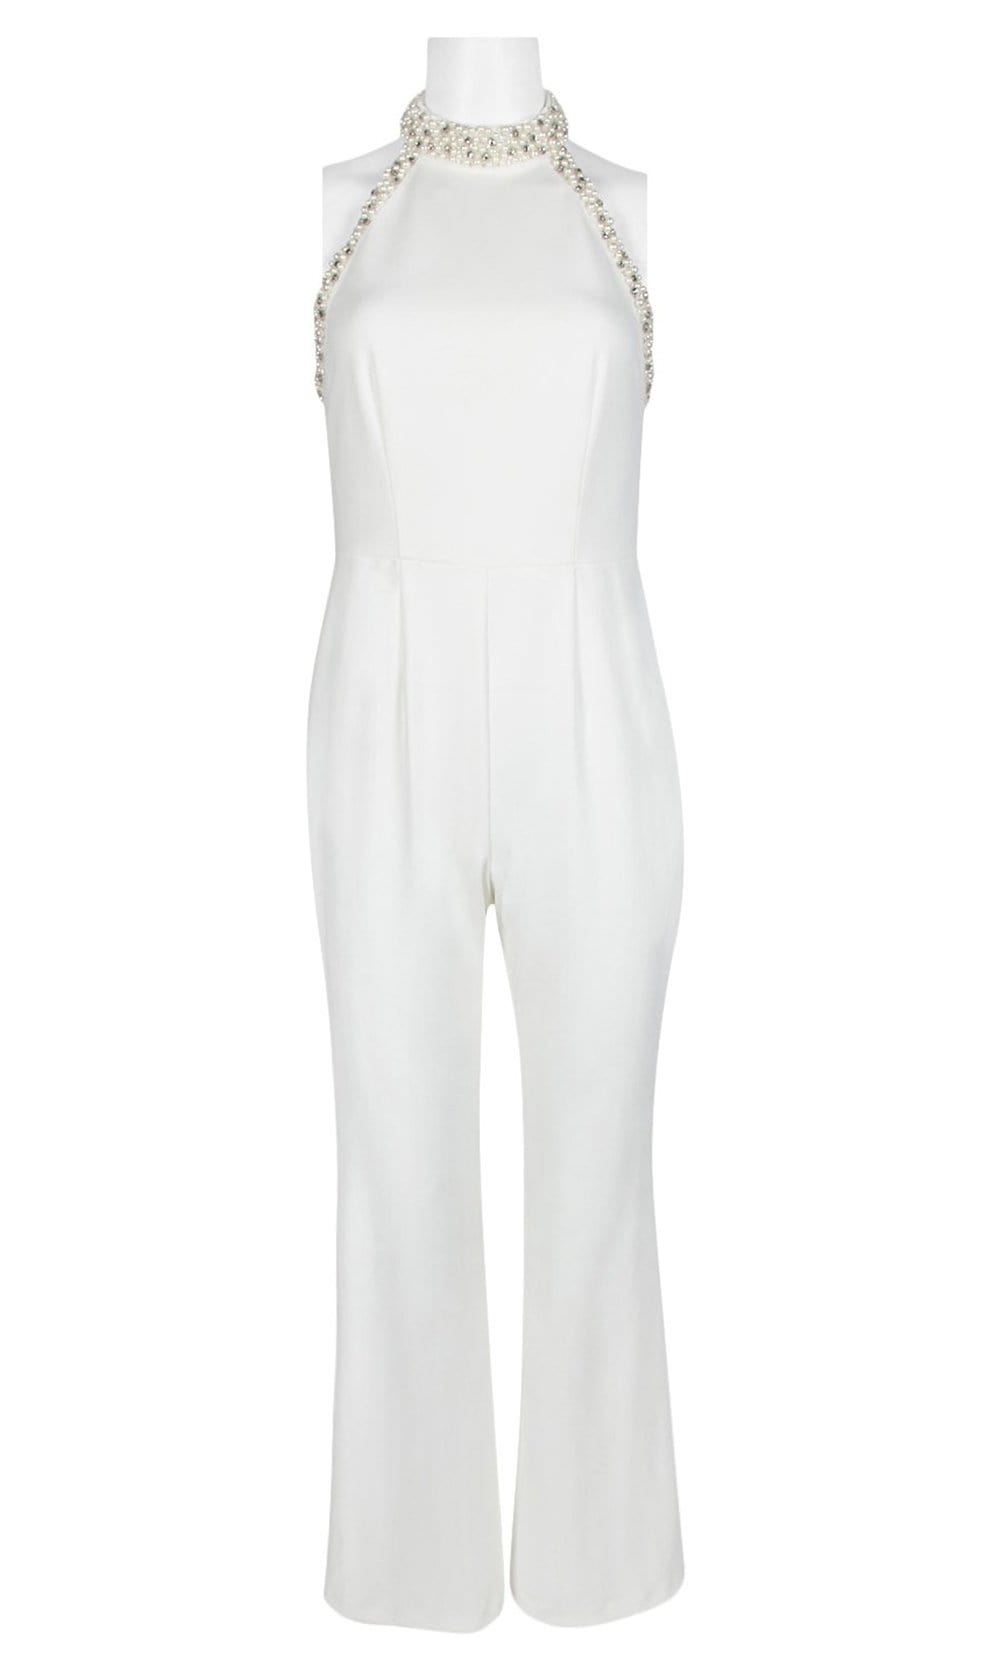 Adrianna Papell - AP1E204372 Pearl Beaded High Halter Jumpsuit
